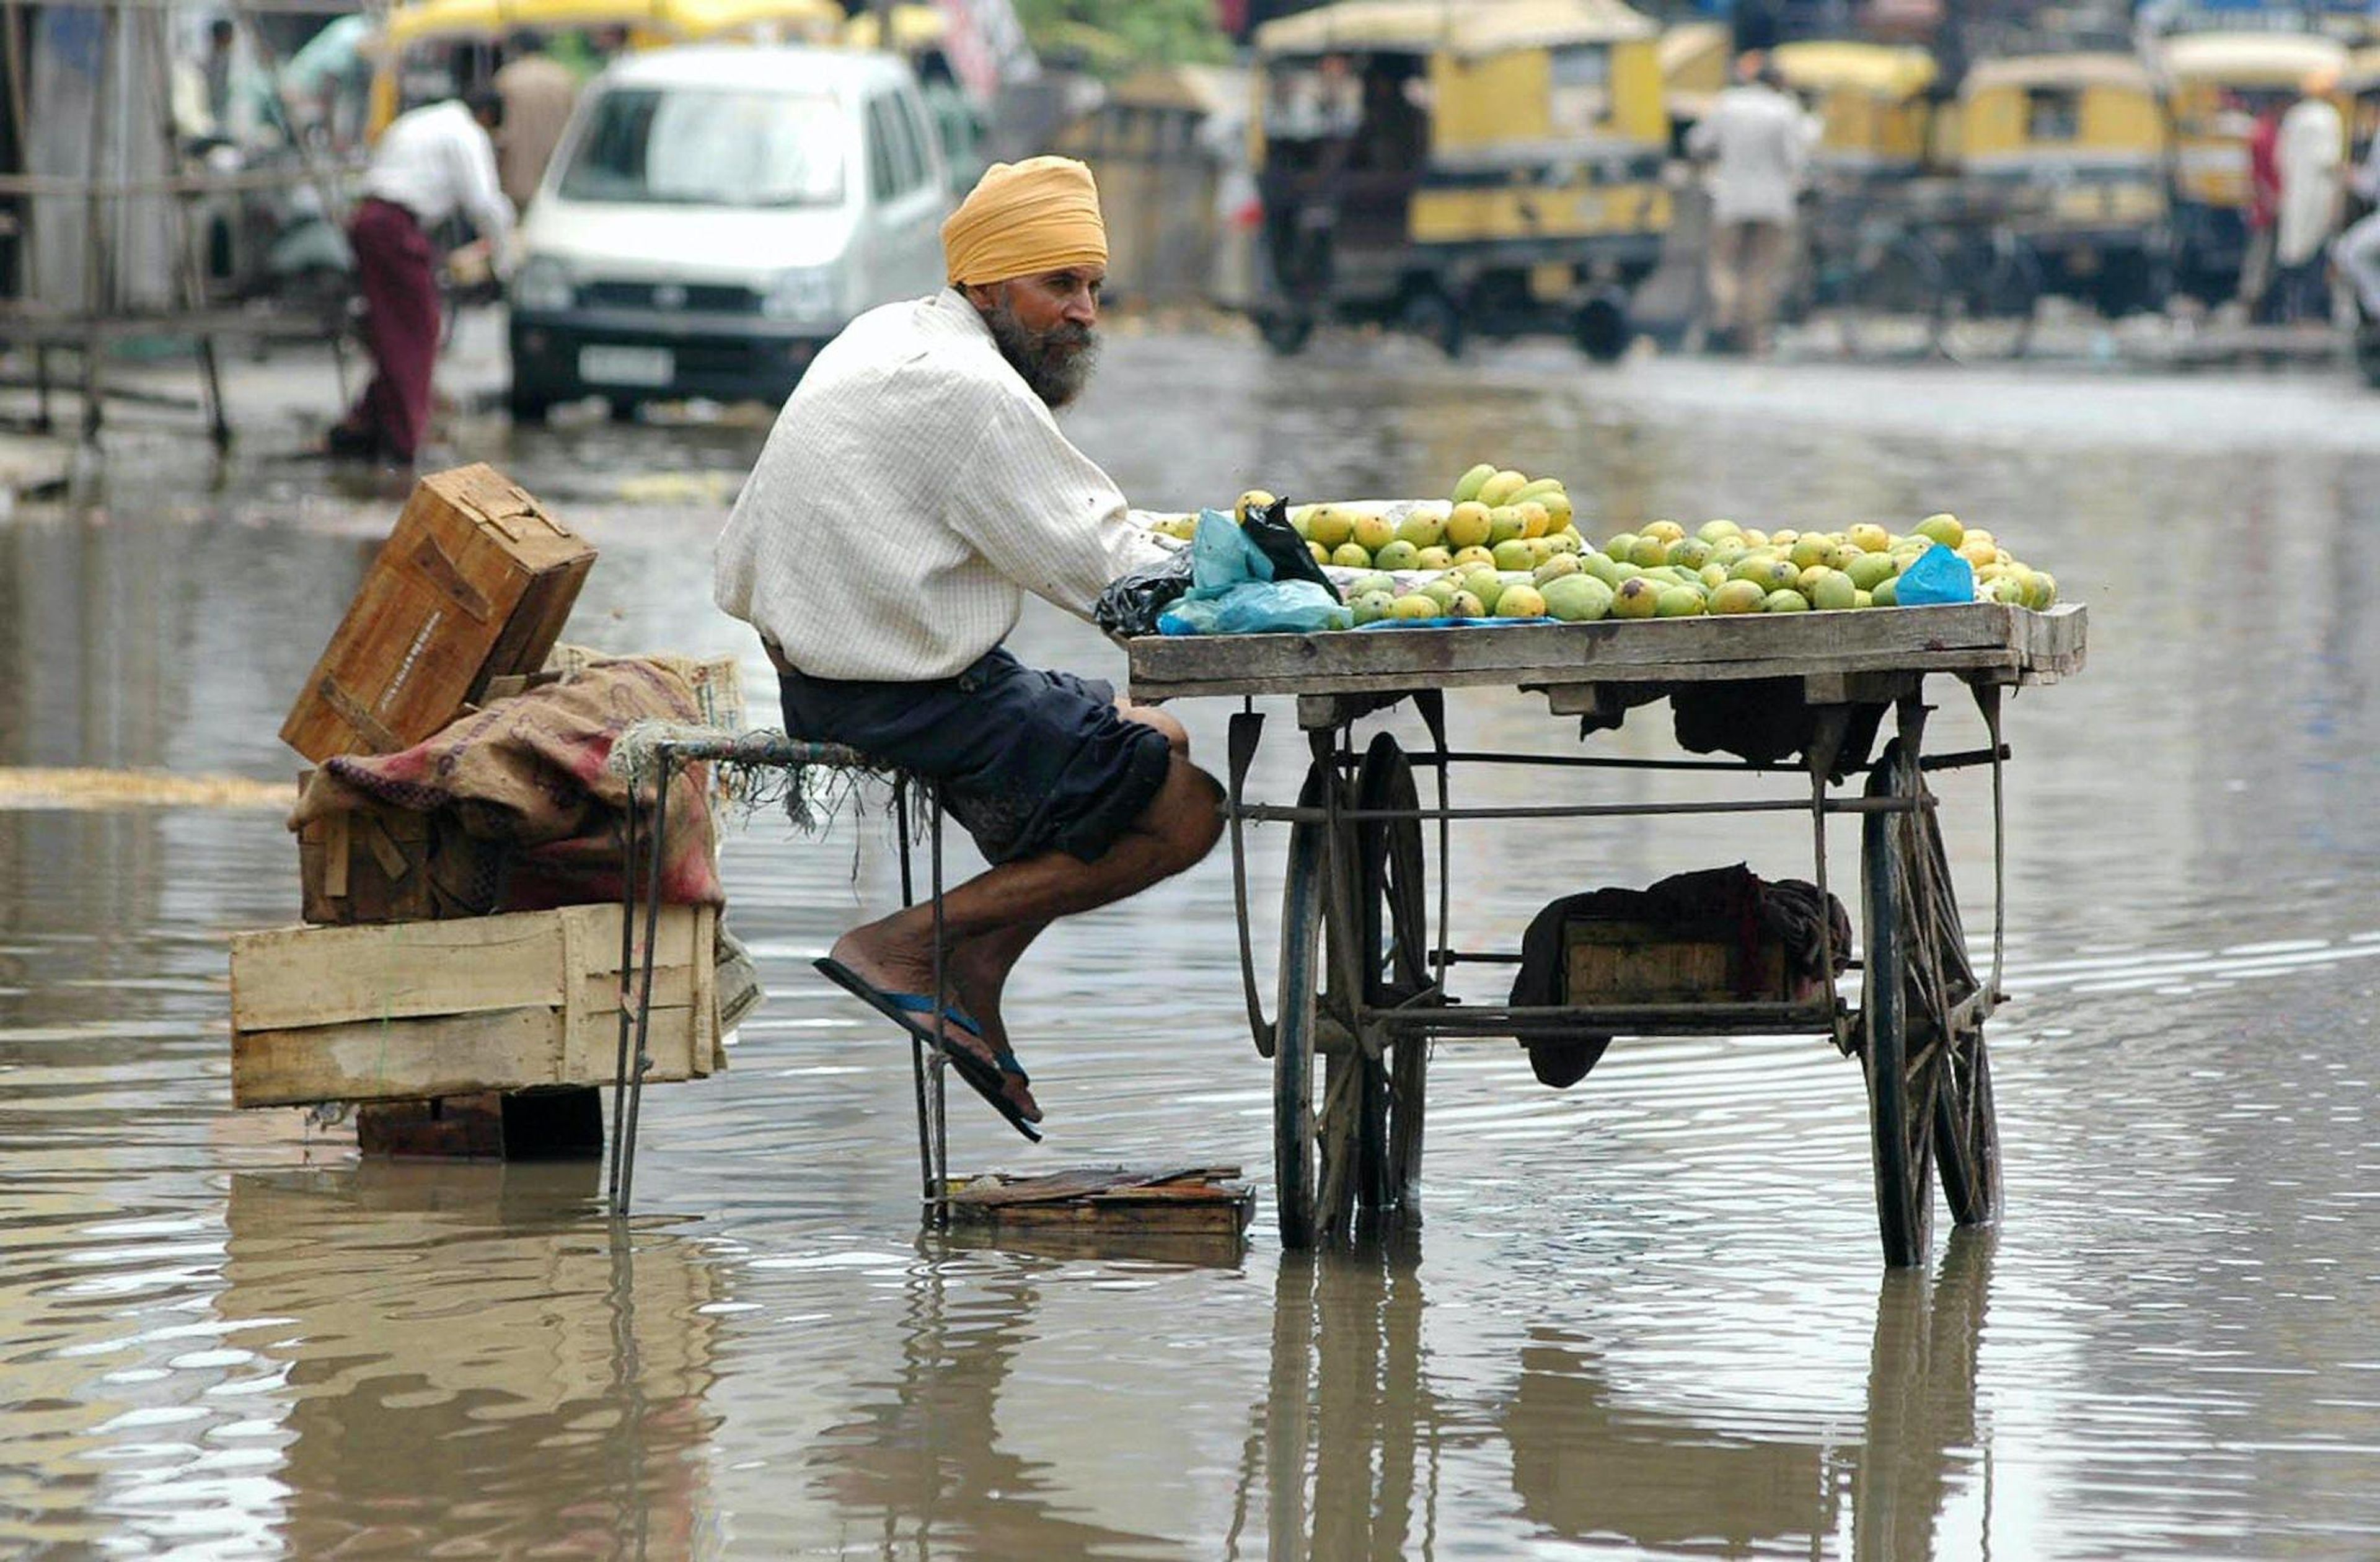 An Indian fruit vendor, Bhupinder Sethi sits on a flooded street as he waits for customers near the bus stand in Punjab.